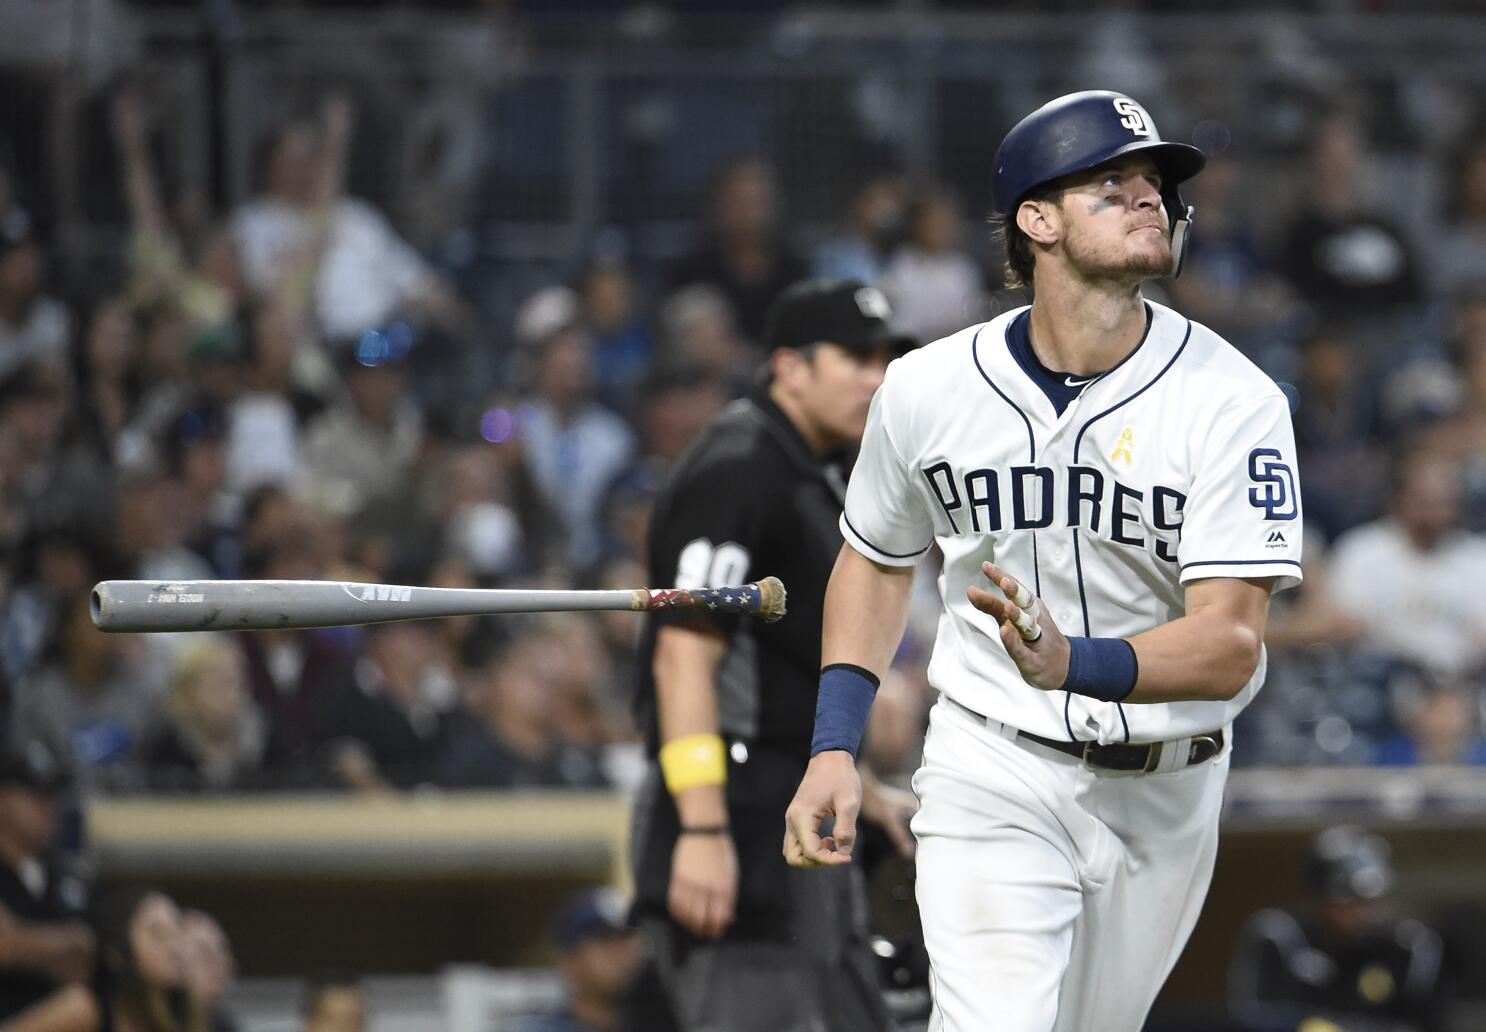 Padres notes: Myers looking to finish strong, the big 4-0 for Kirby Yates -  The San Diego Union-Tribune